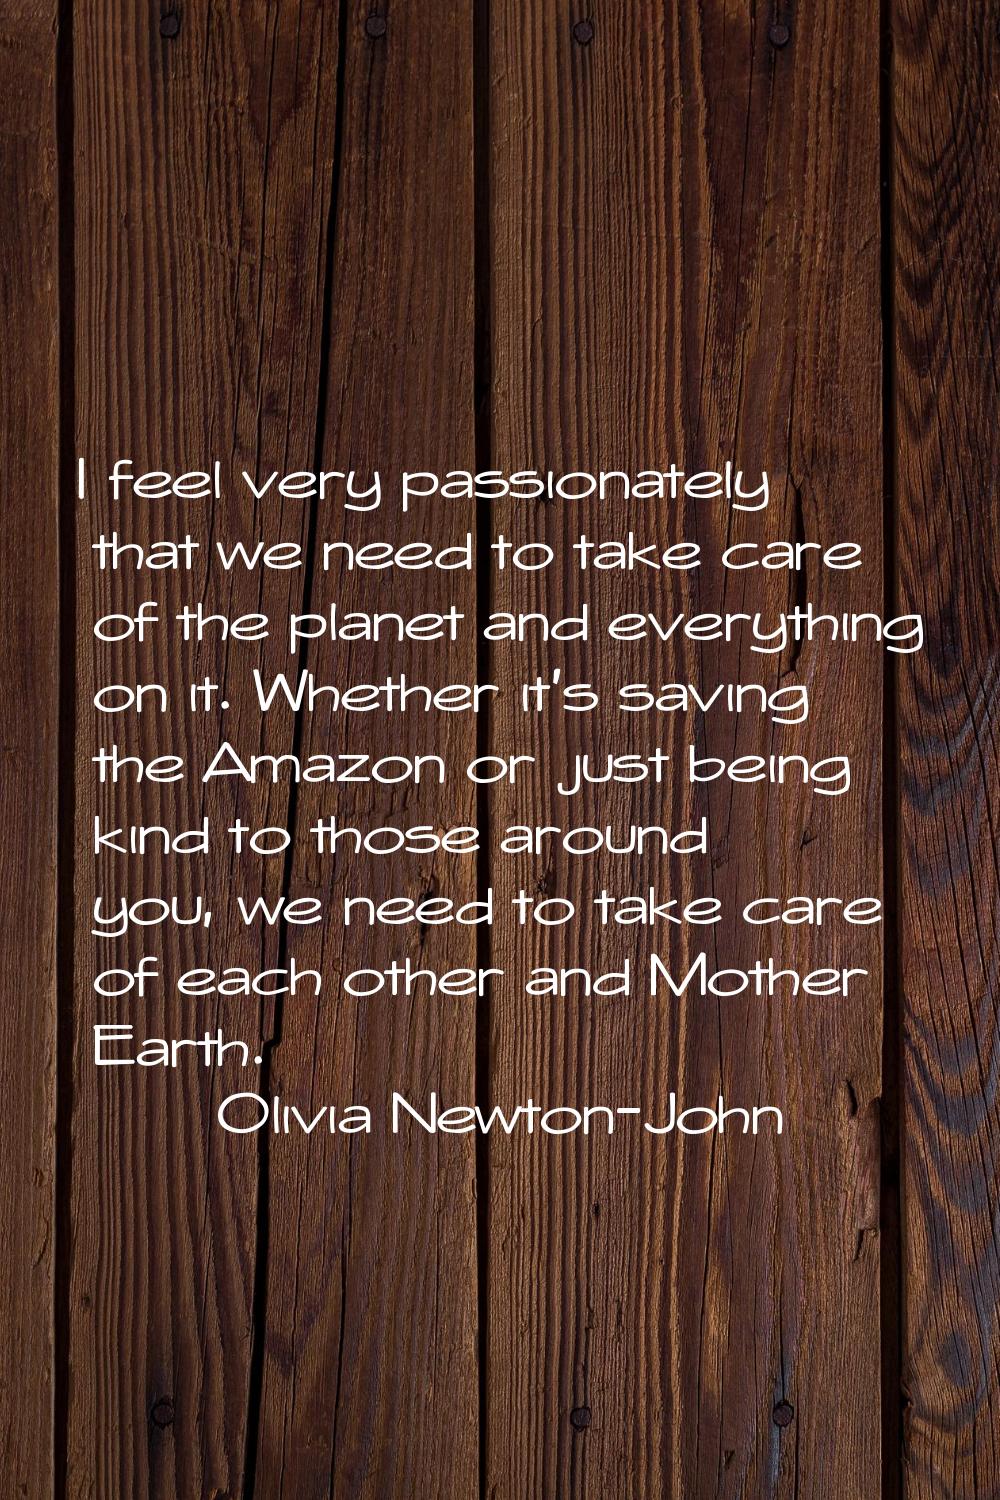 I feel very passionately that we need to take care of the planet and everything on it. Whether it's